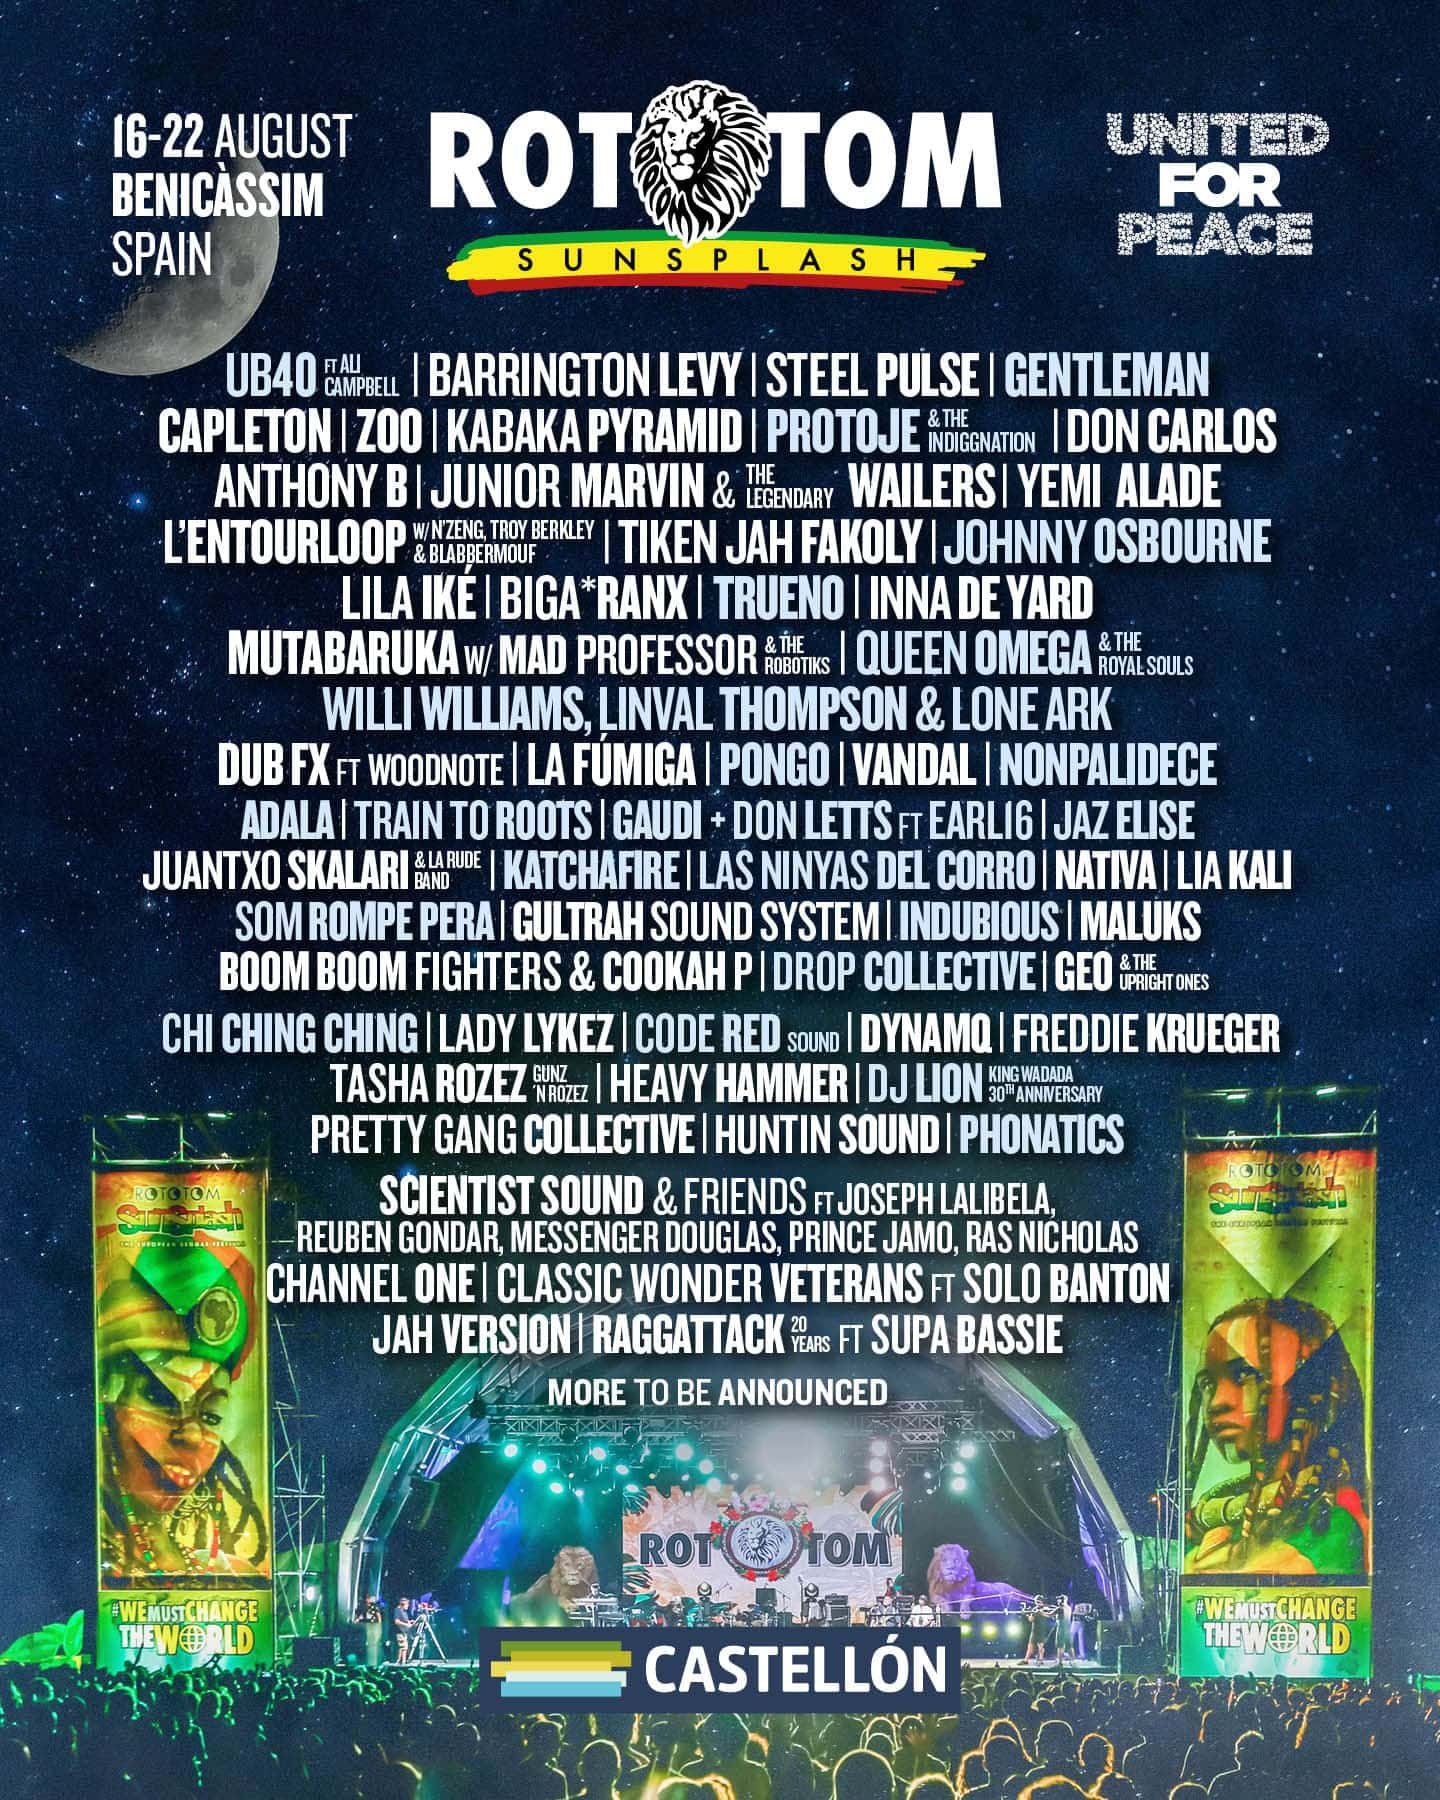 More than twenty artists join our lineup for this summer Rototom